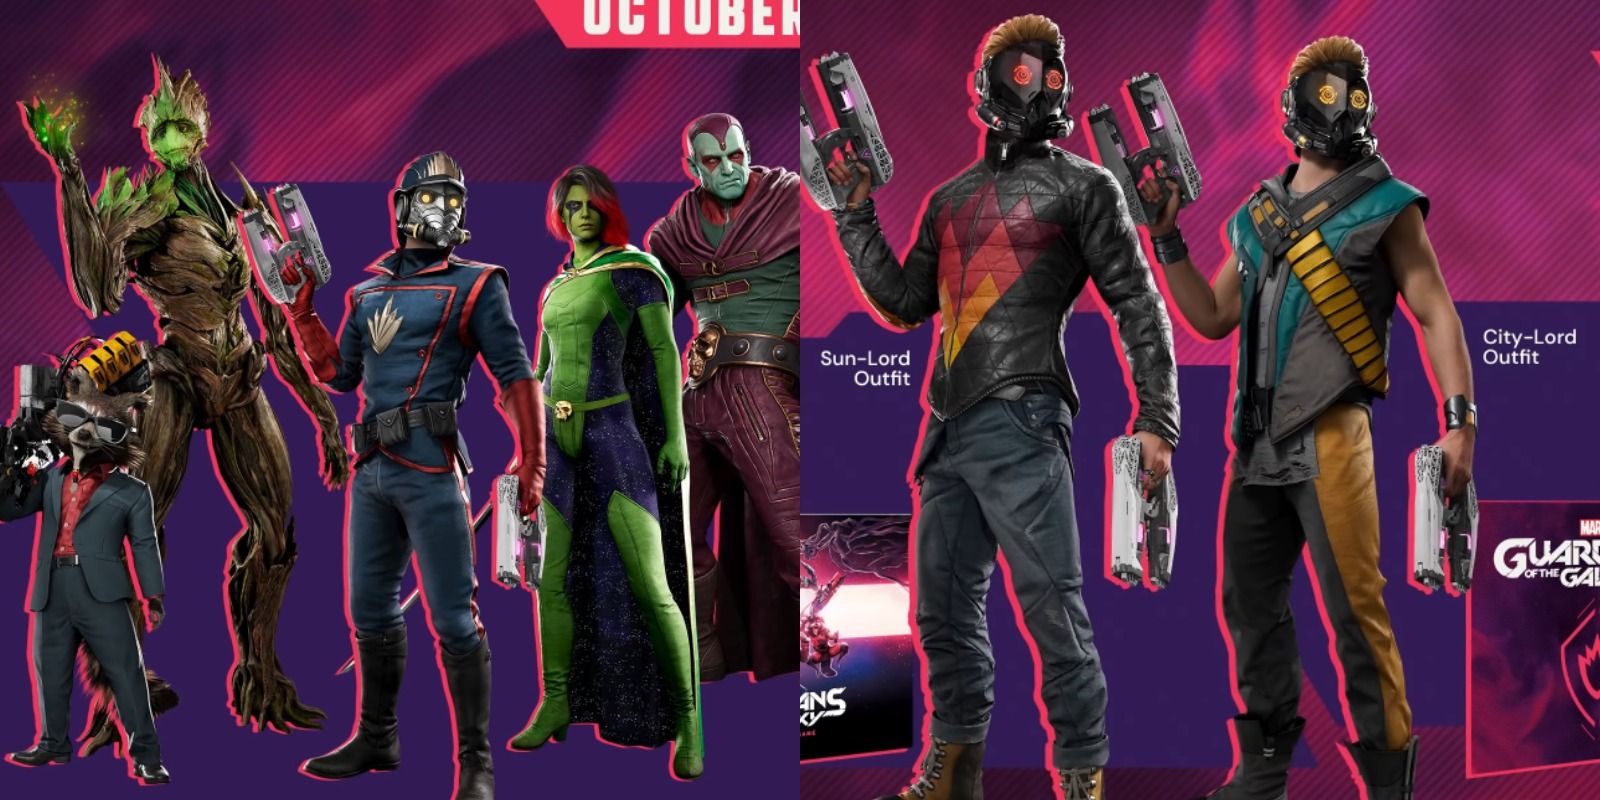 Alternate outfits for characters in Marvel's Guardians Of The Galaxy